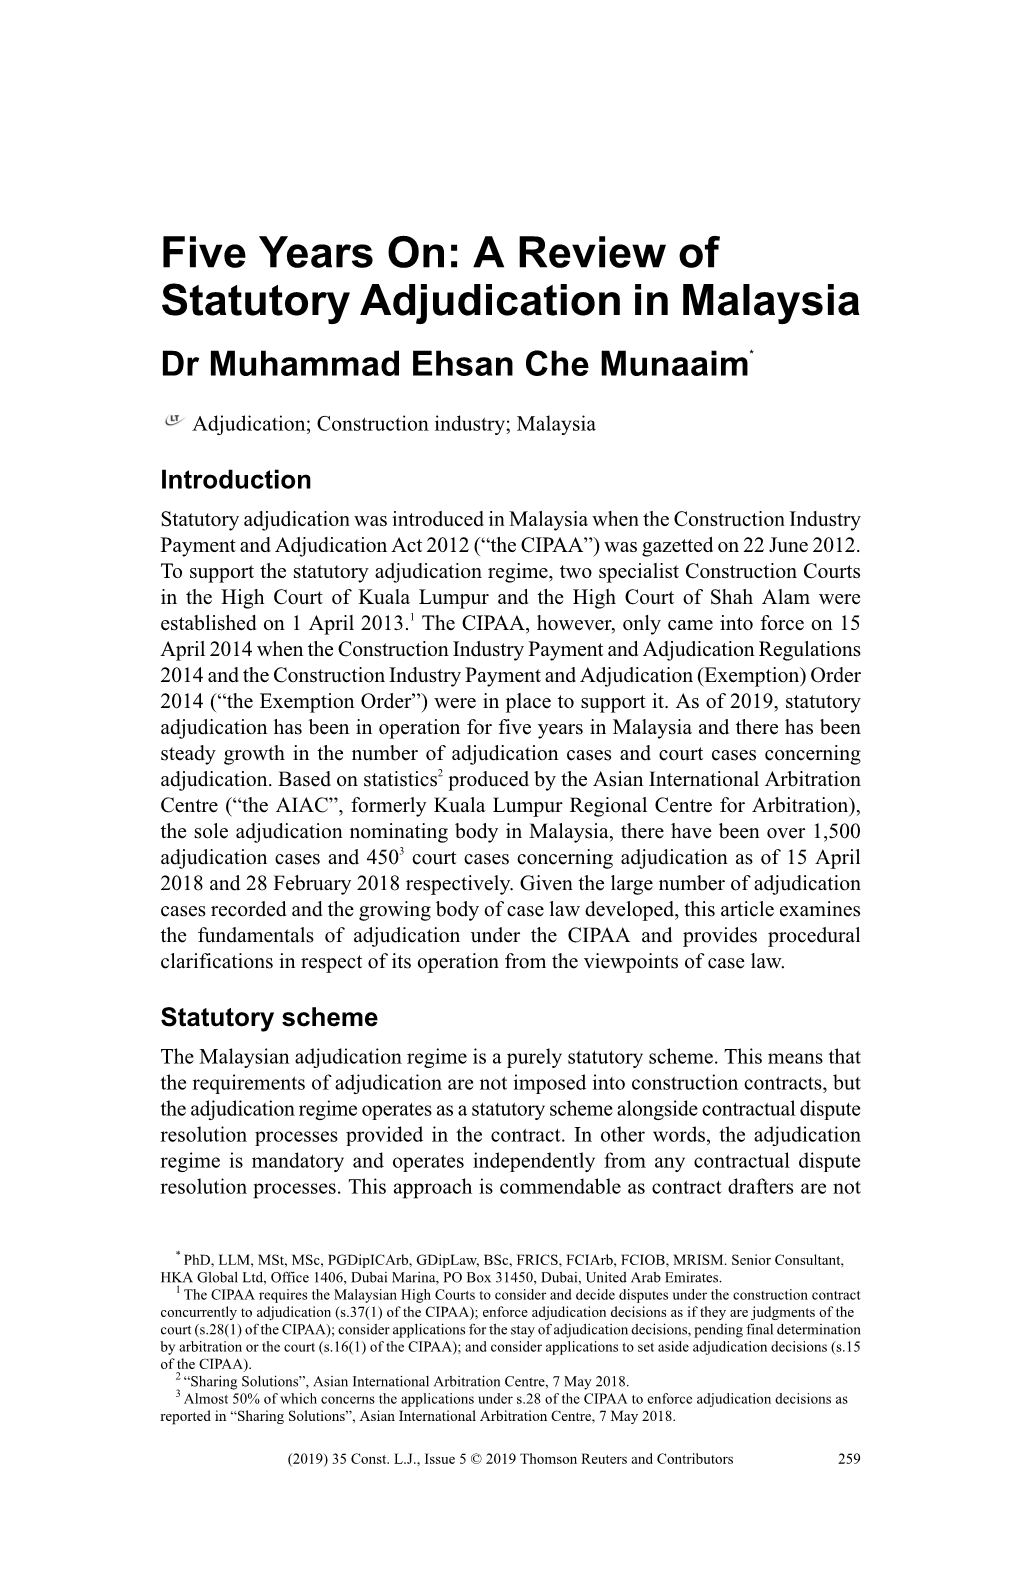 Five Years On: a Review of Statutory Adjudication in Malaysia Dr Muhammad Ehsan Che Munaaim*